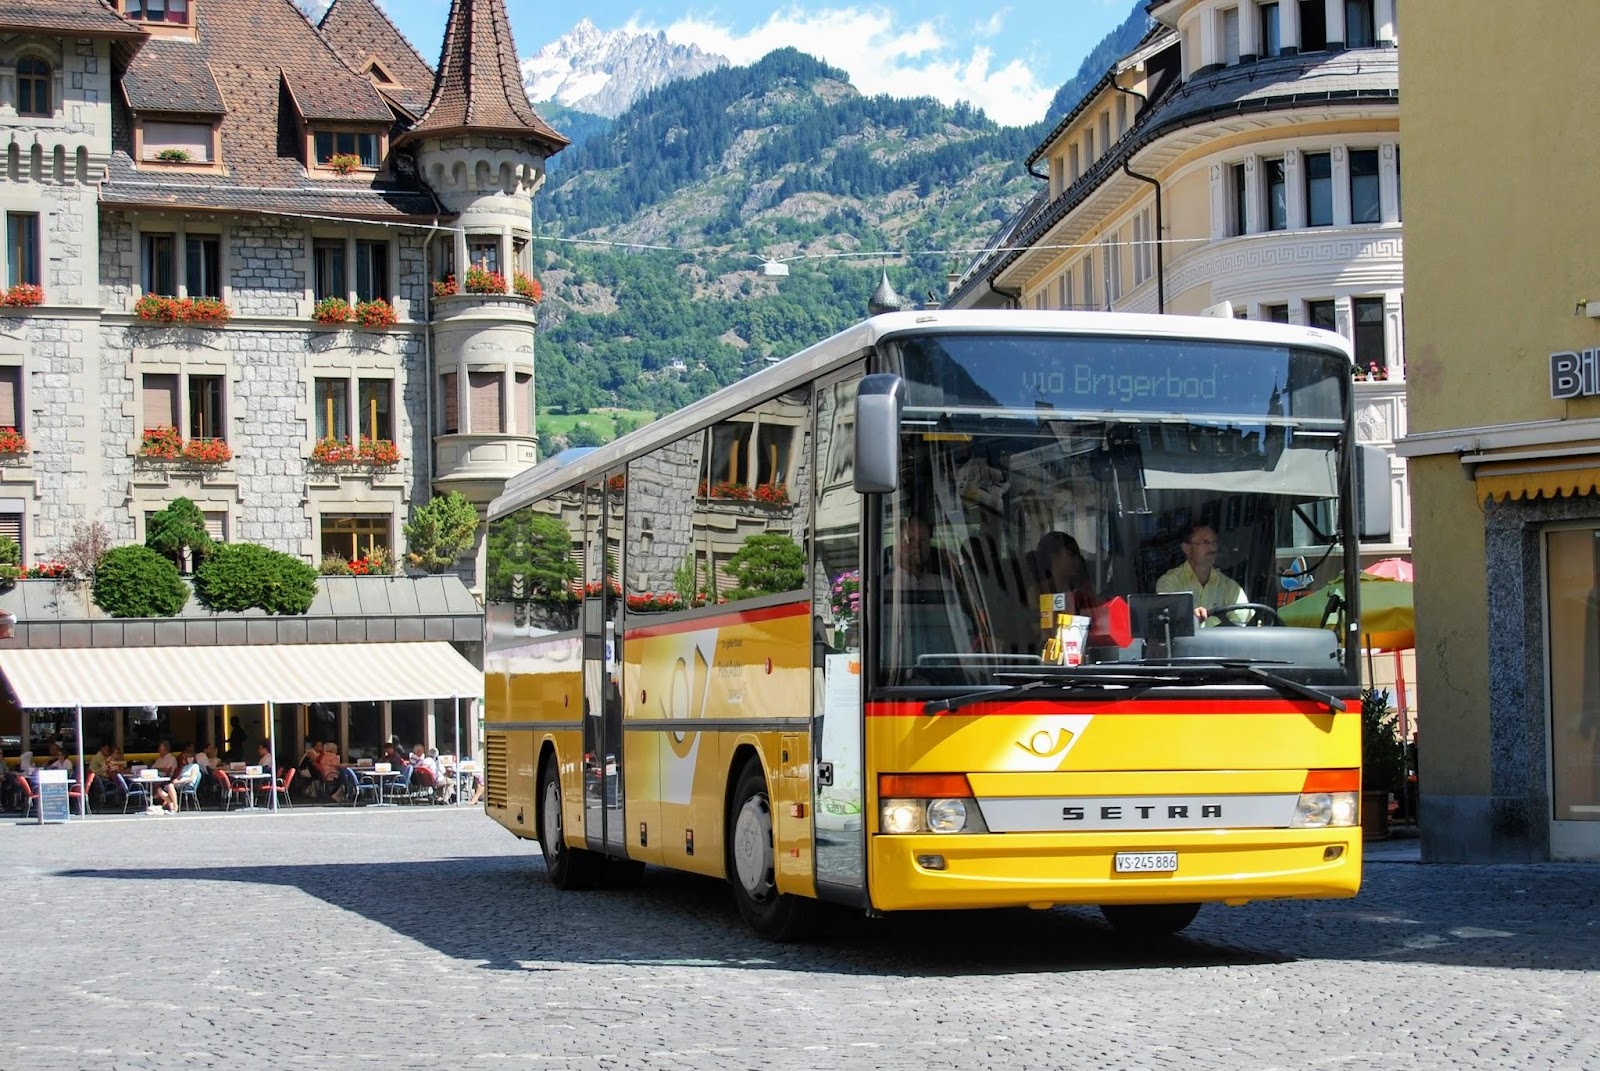 A yellow bus on teh streets of Zurich